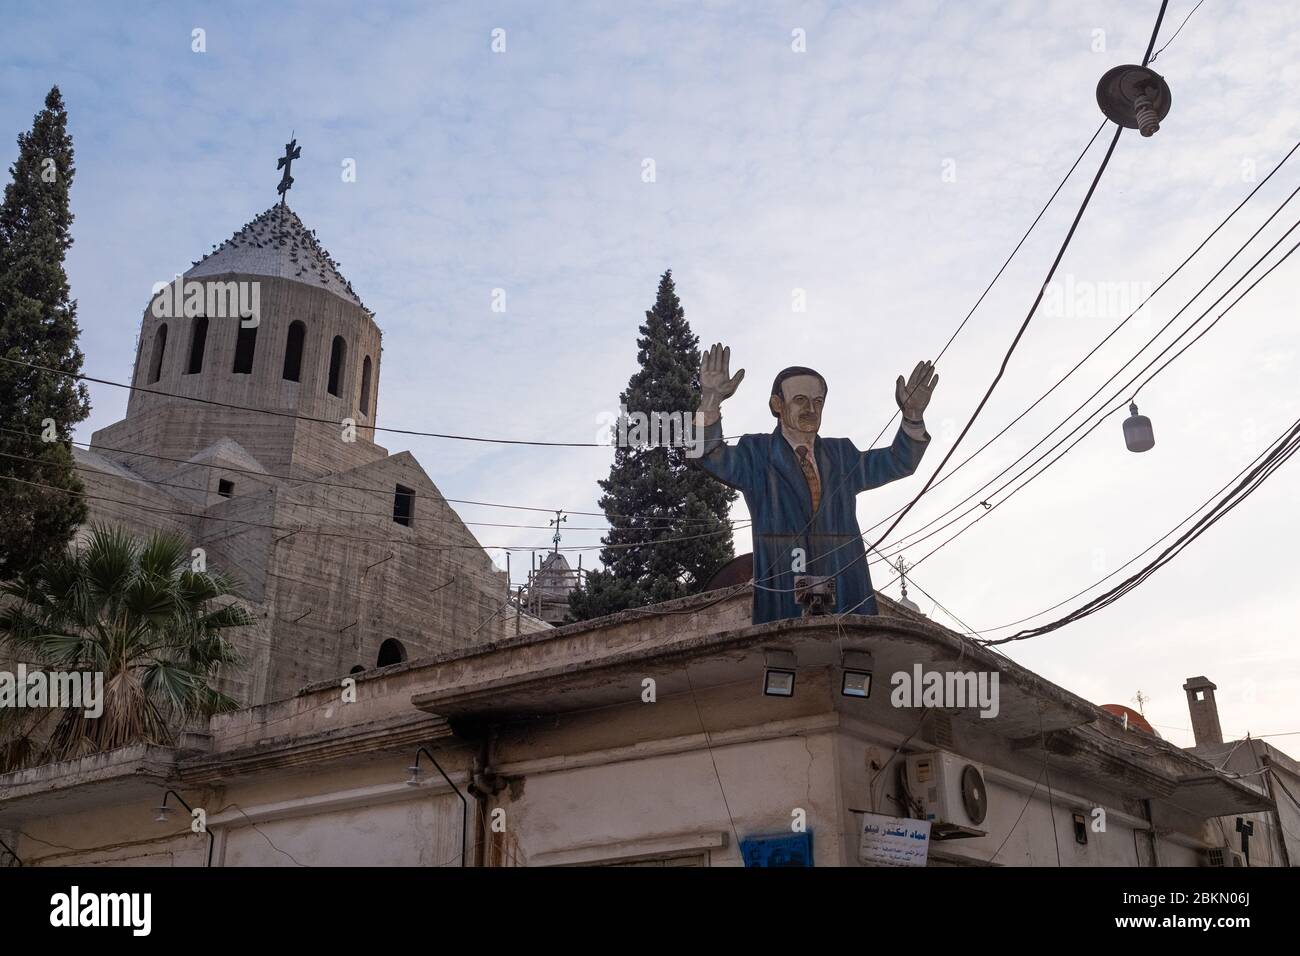 A depiction of Hafaz Al-Assad outside an Christian Orthodox Church in Qamishli. The Syrian Regime's narrative of protecting religious minorities remains strong in some areas of the country. Stock Photo